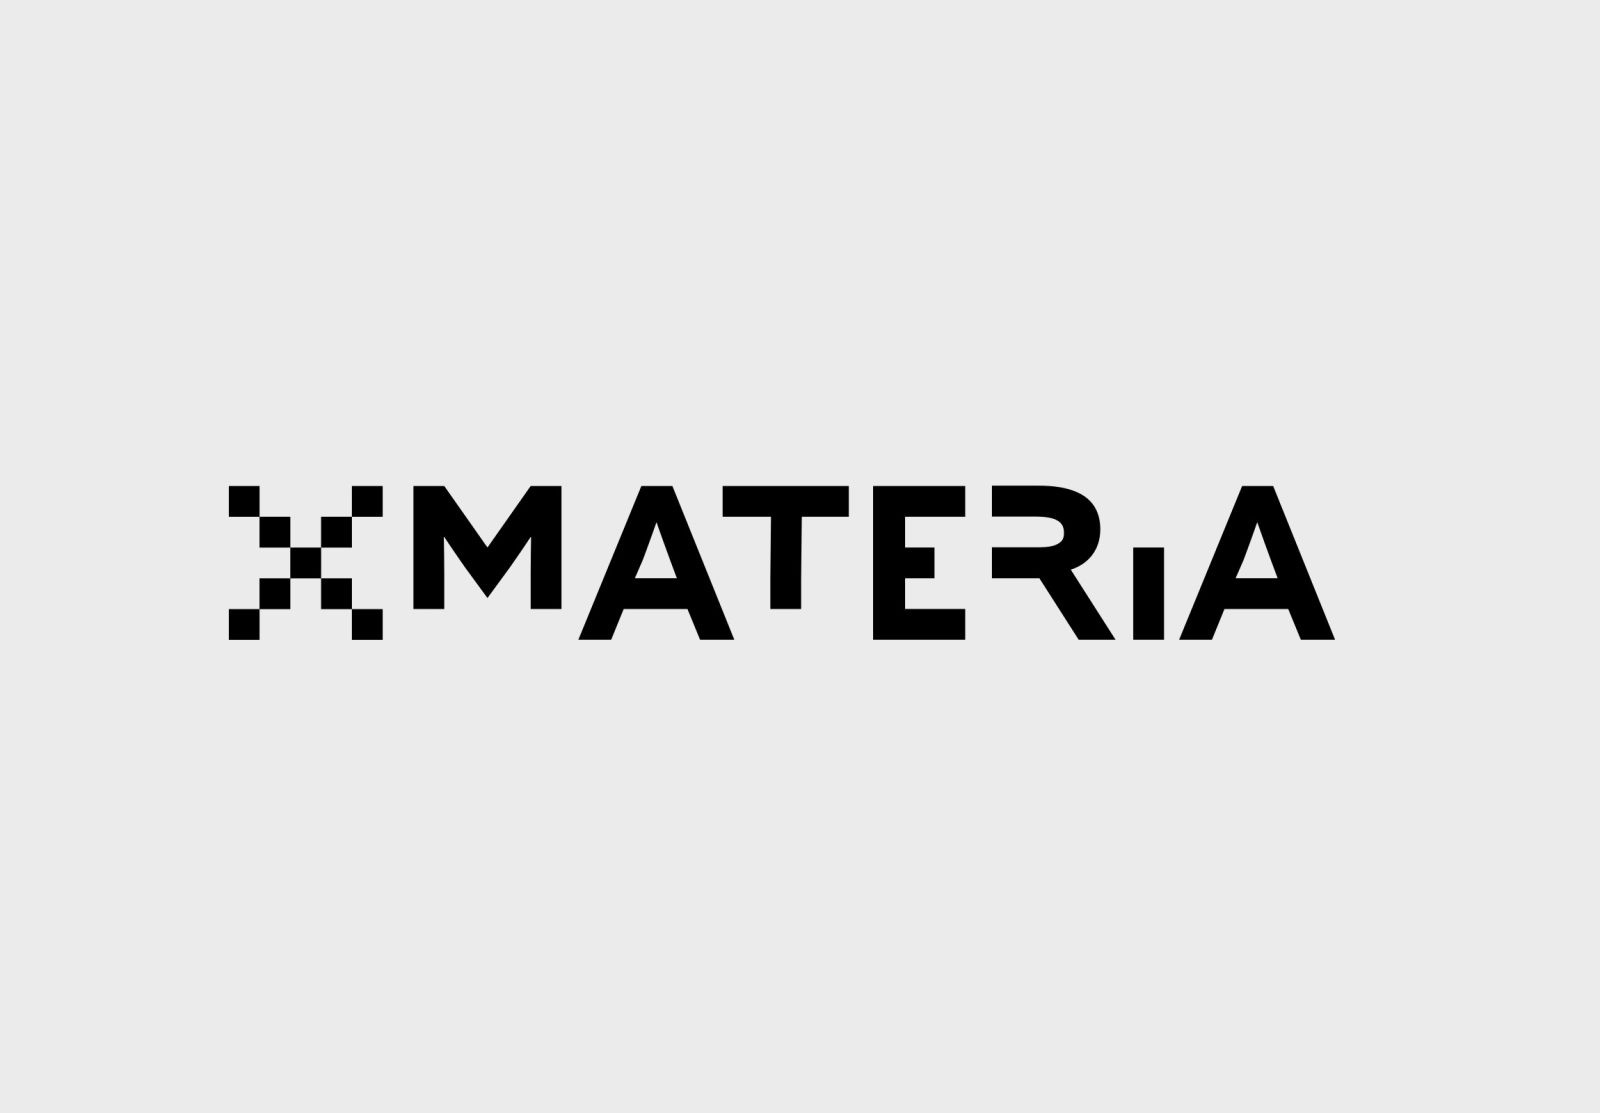 Xmateria – Making Something From Something That Already Exists by Pencil Studio